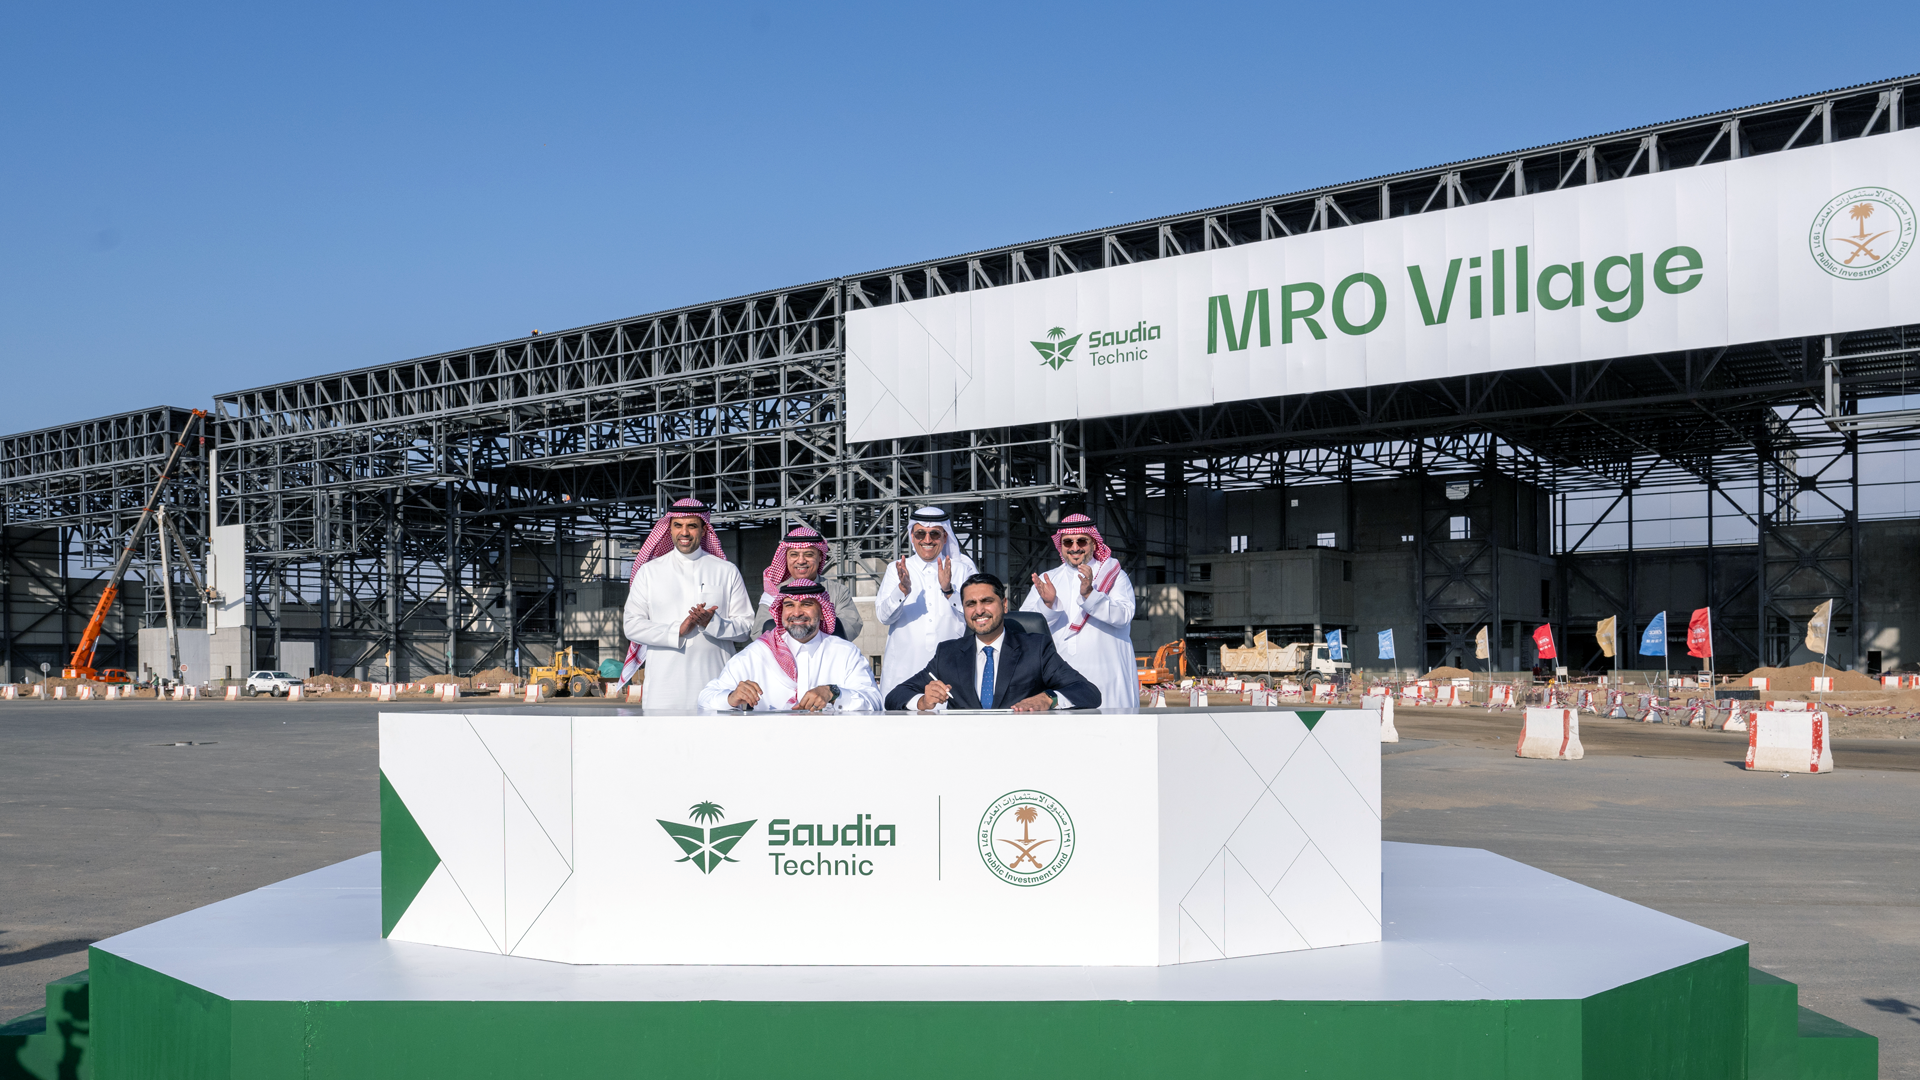 PIF invests in Saudia Technic to create leadership edge in MRO